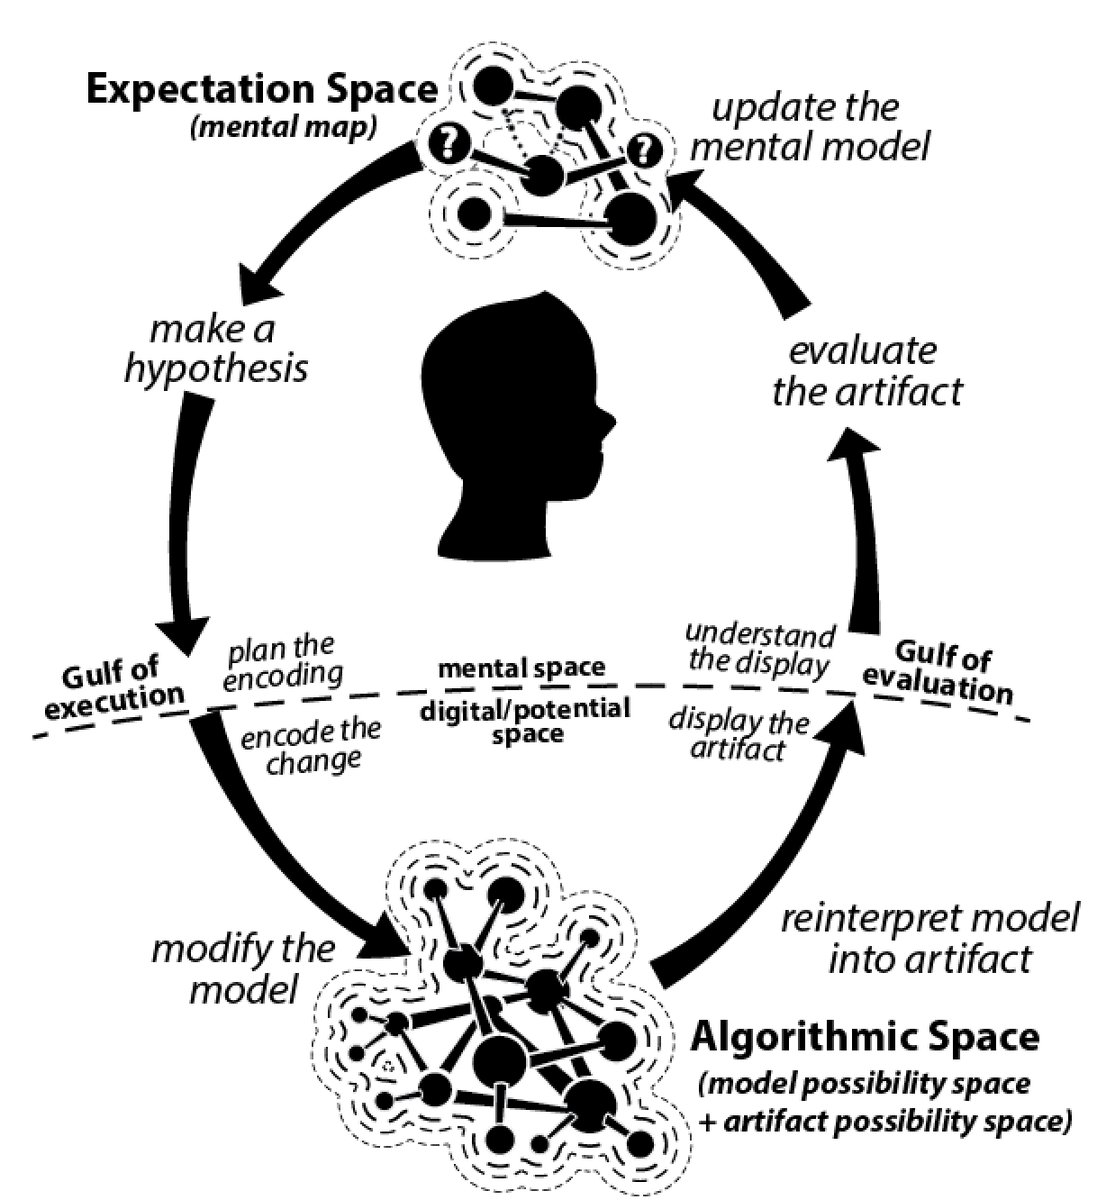 A diagram. The top half shows the expectation space, and the bottom half the algorithmic space. The process is circular. You start with a mental model, make a hypothesis about what a change will do, then encode the change. In the algorithmic space the model is modified by the change, the code reinterprets the model and displays the results of the change. The user then evaluates the artifact and updates their mental model of how the algorithmic space works. The process restarts.